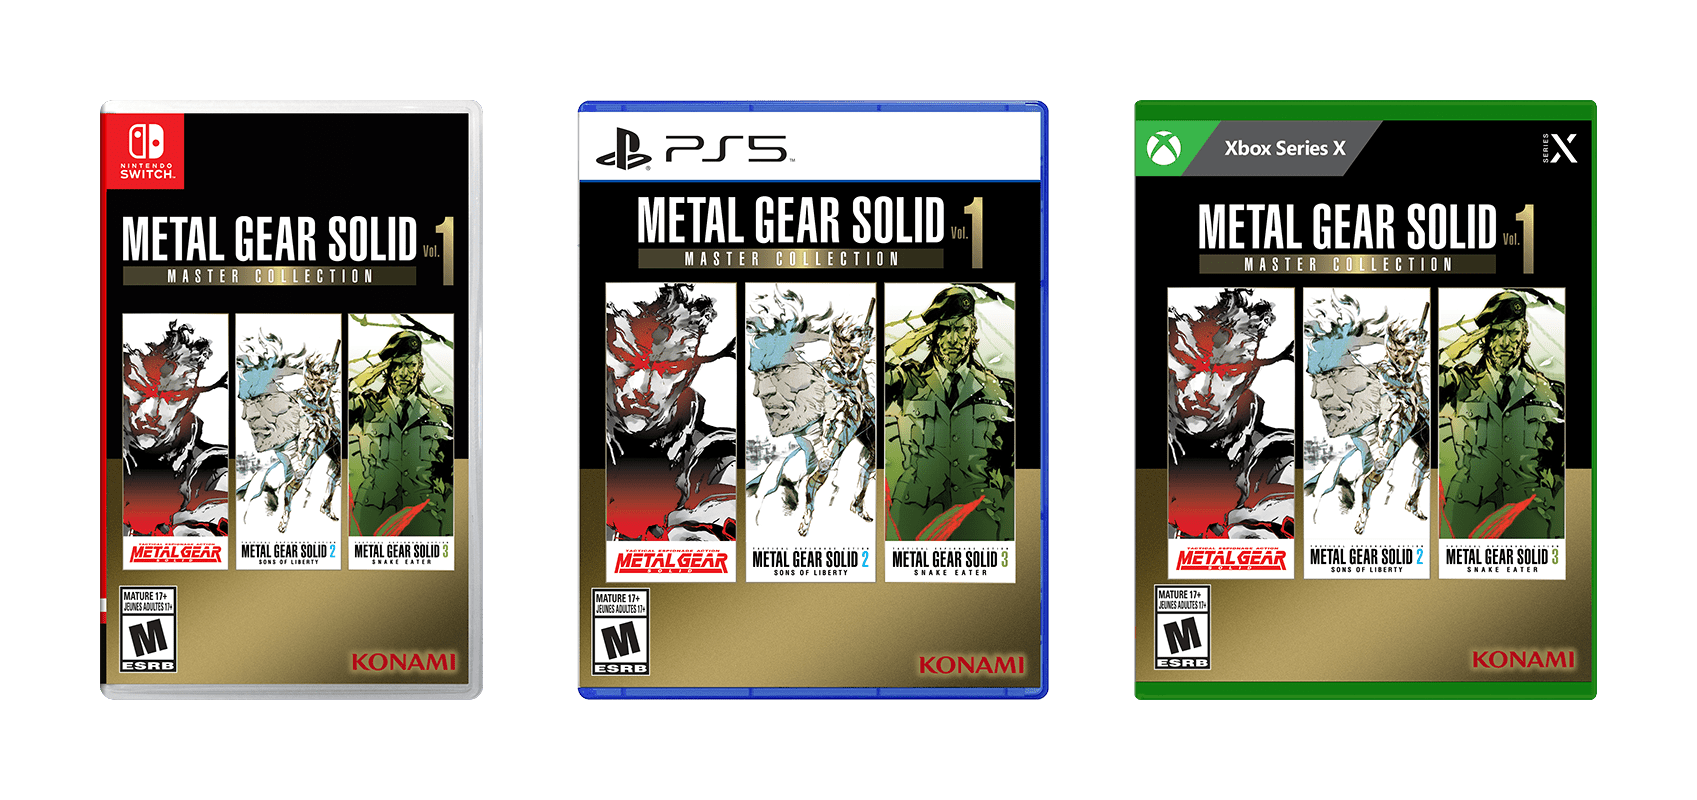 Metal Gear Solid: Master Collection Vol. 1 launches October 24 for